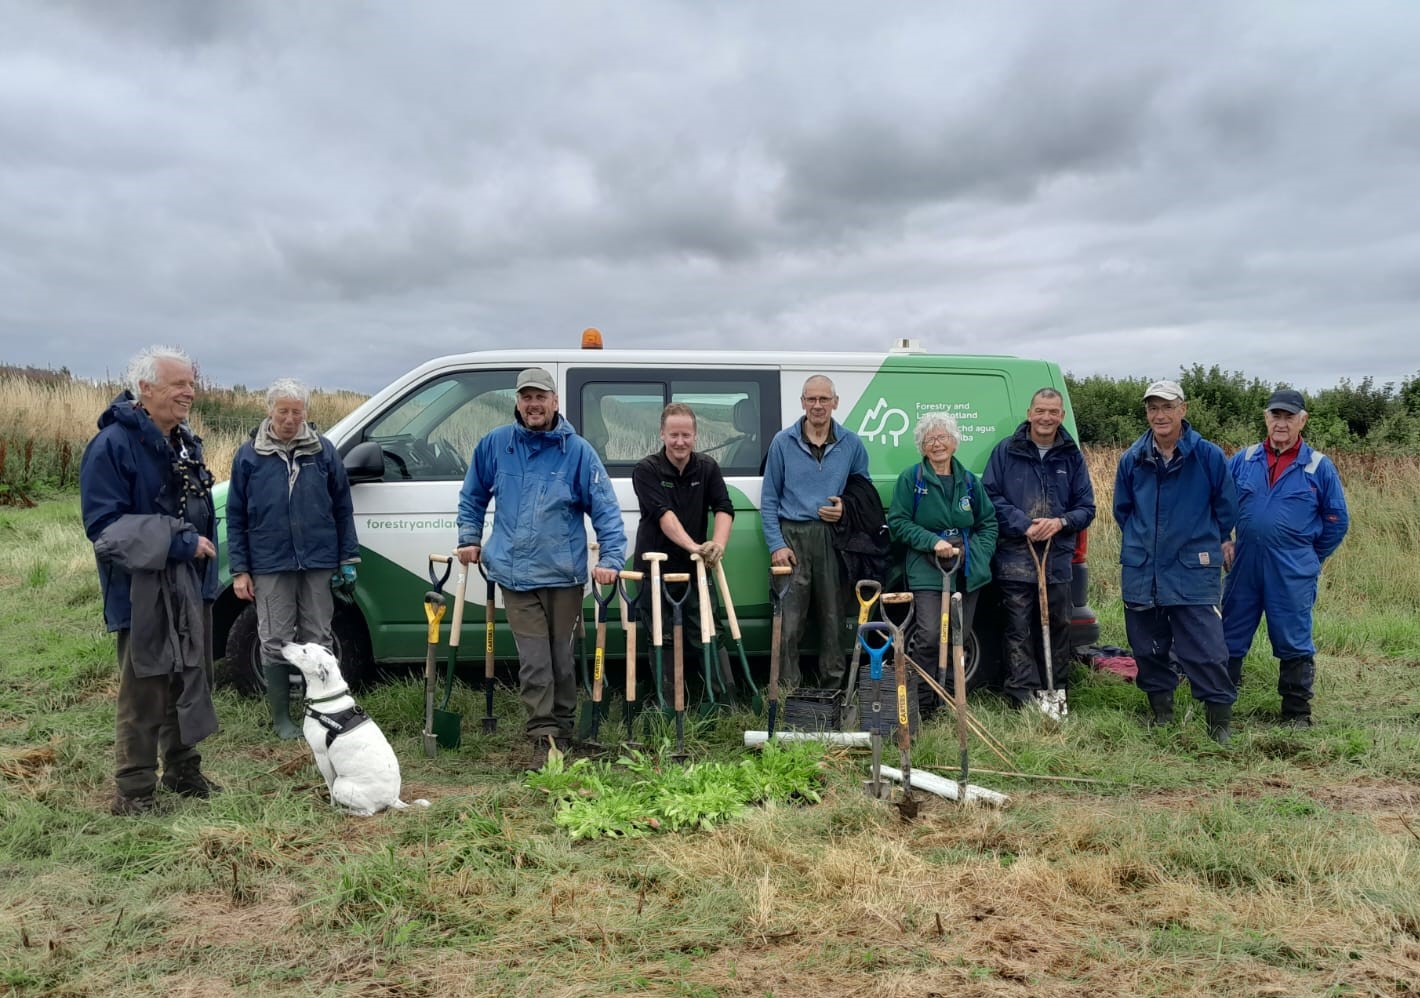 A team of FLS staff and volunteers standing in a meadow in front of a branded work van